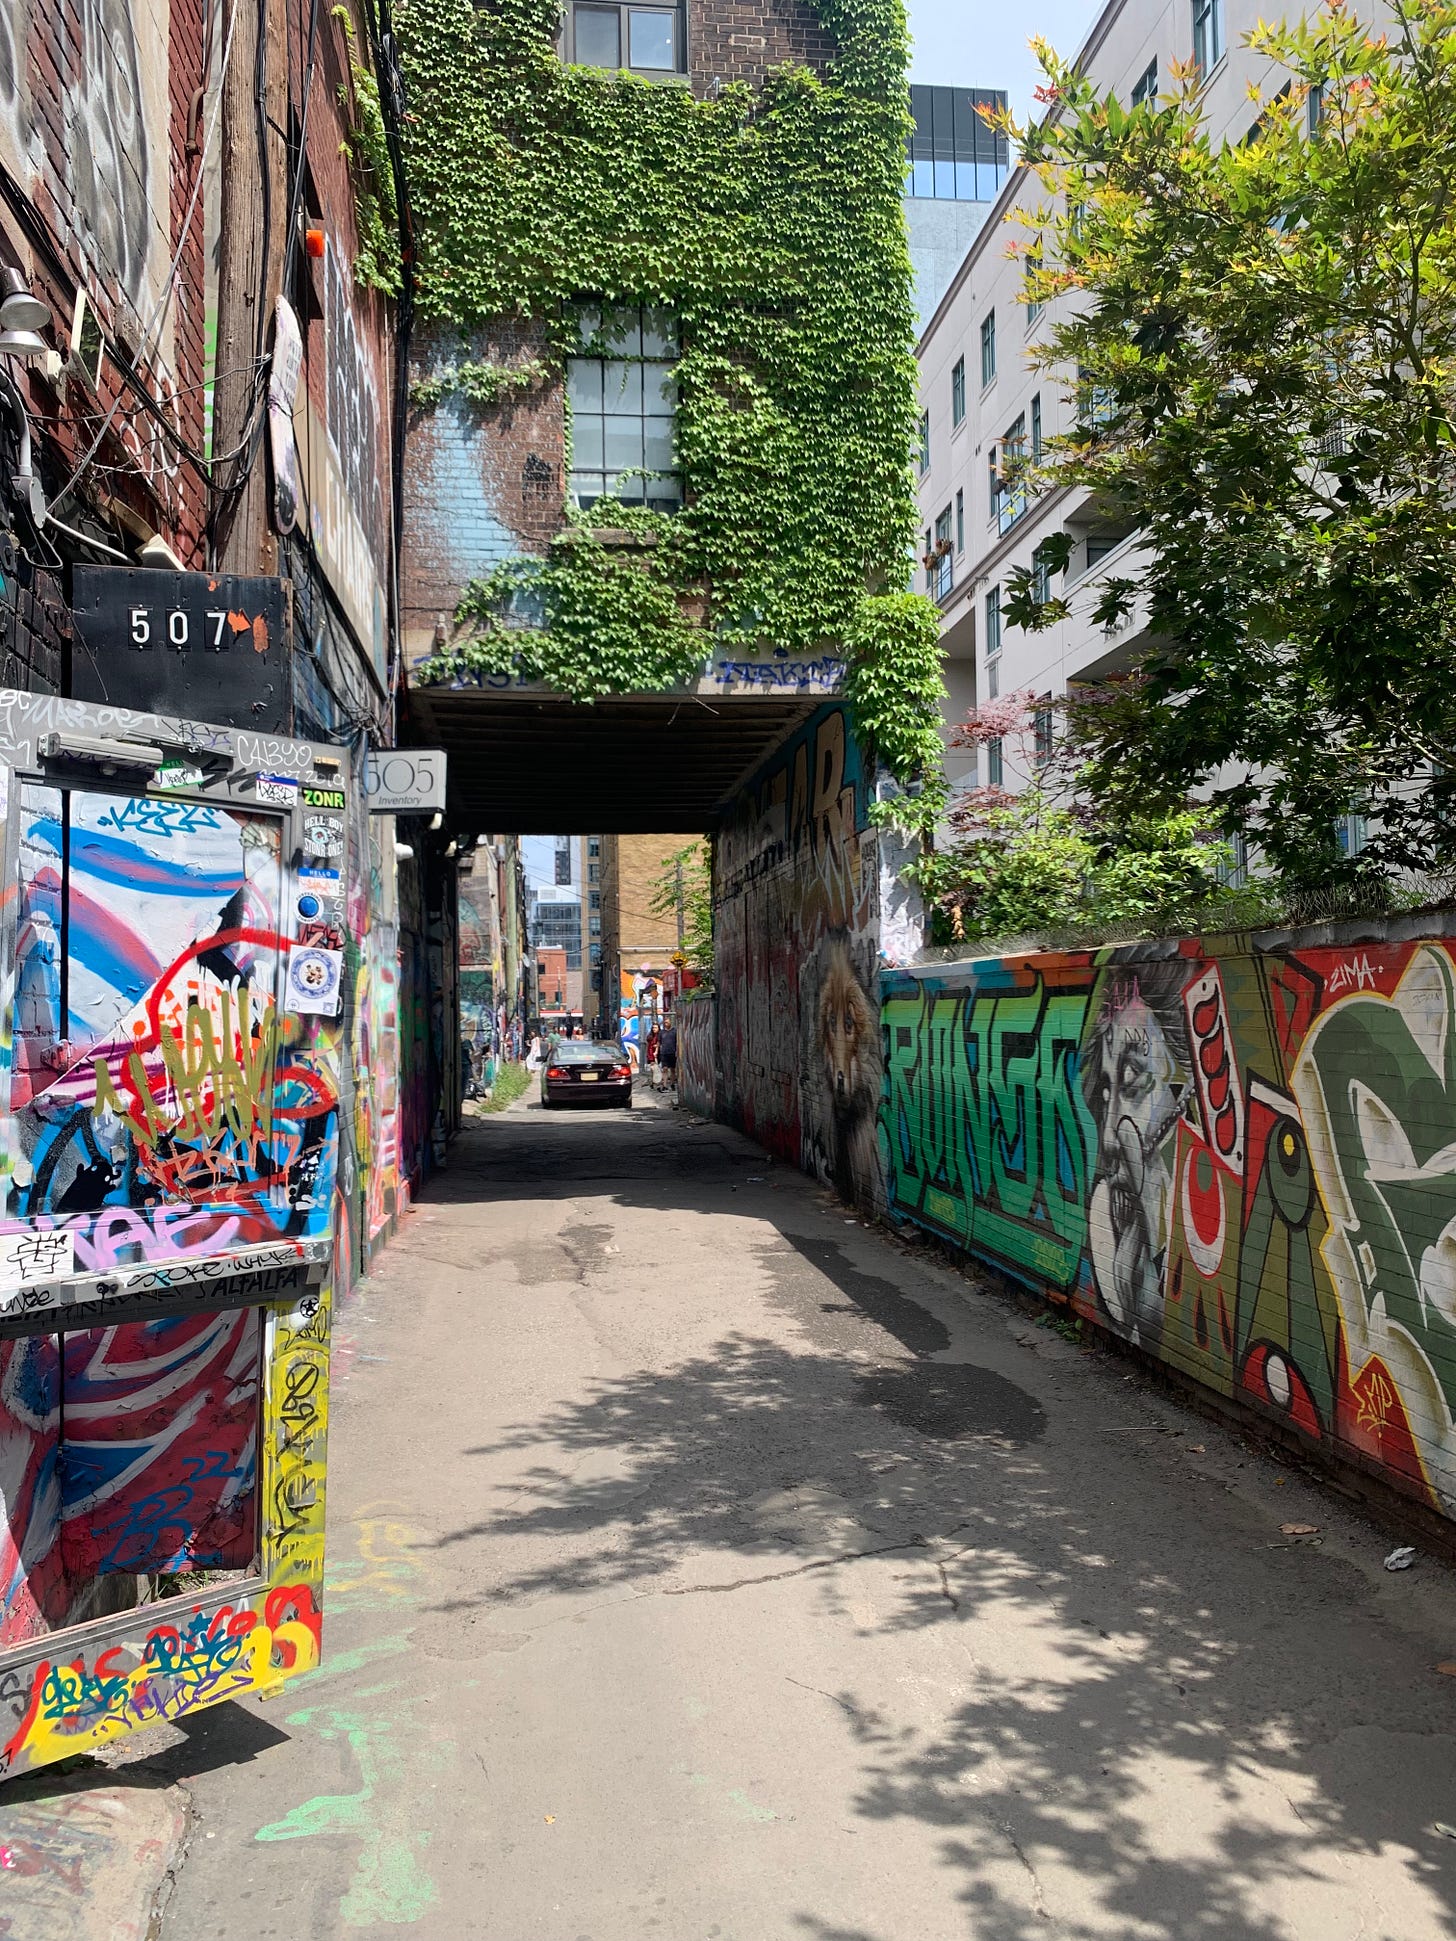 An alley with low walls in vibrant graffiti tags, with some street art images. A building that hangs over the alley is covered in ivy, and creates a tunnel that a car is driving through.